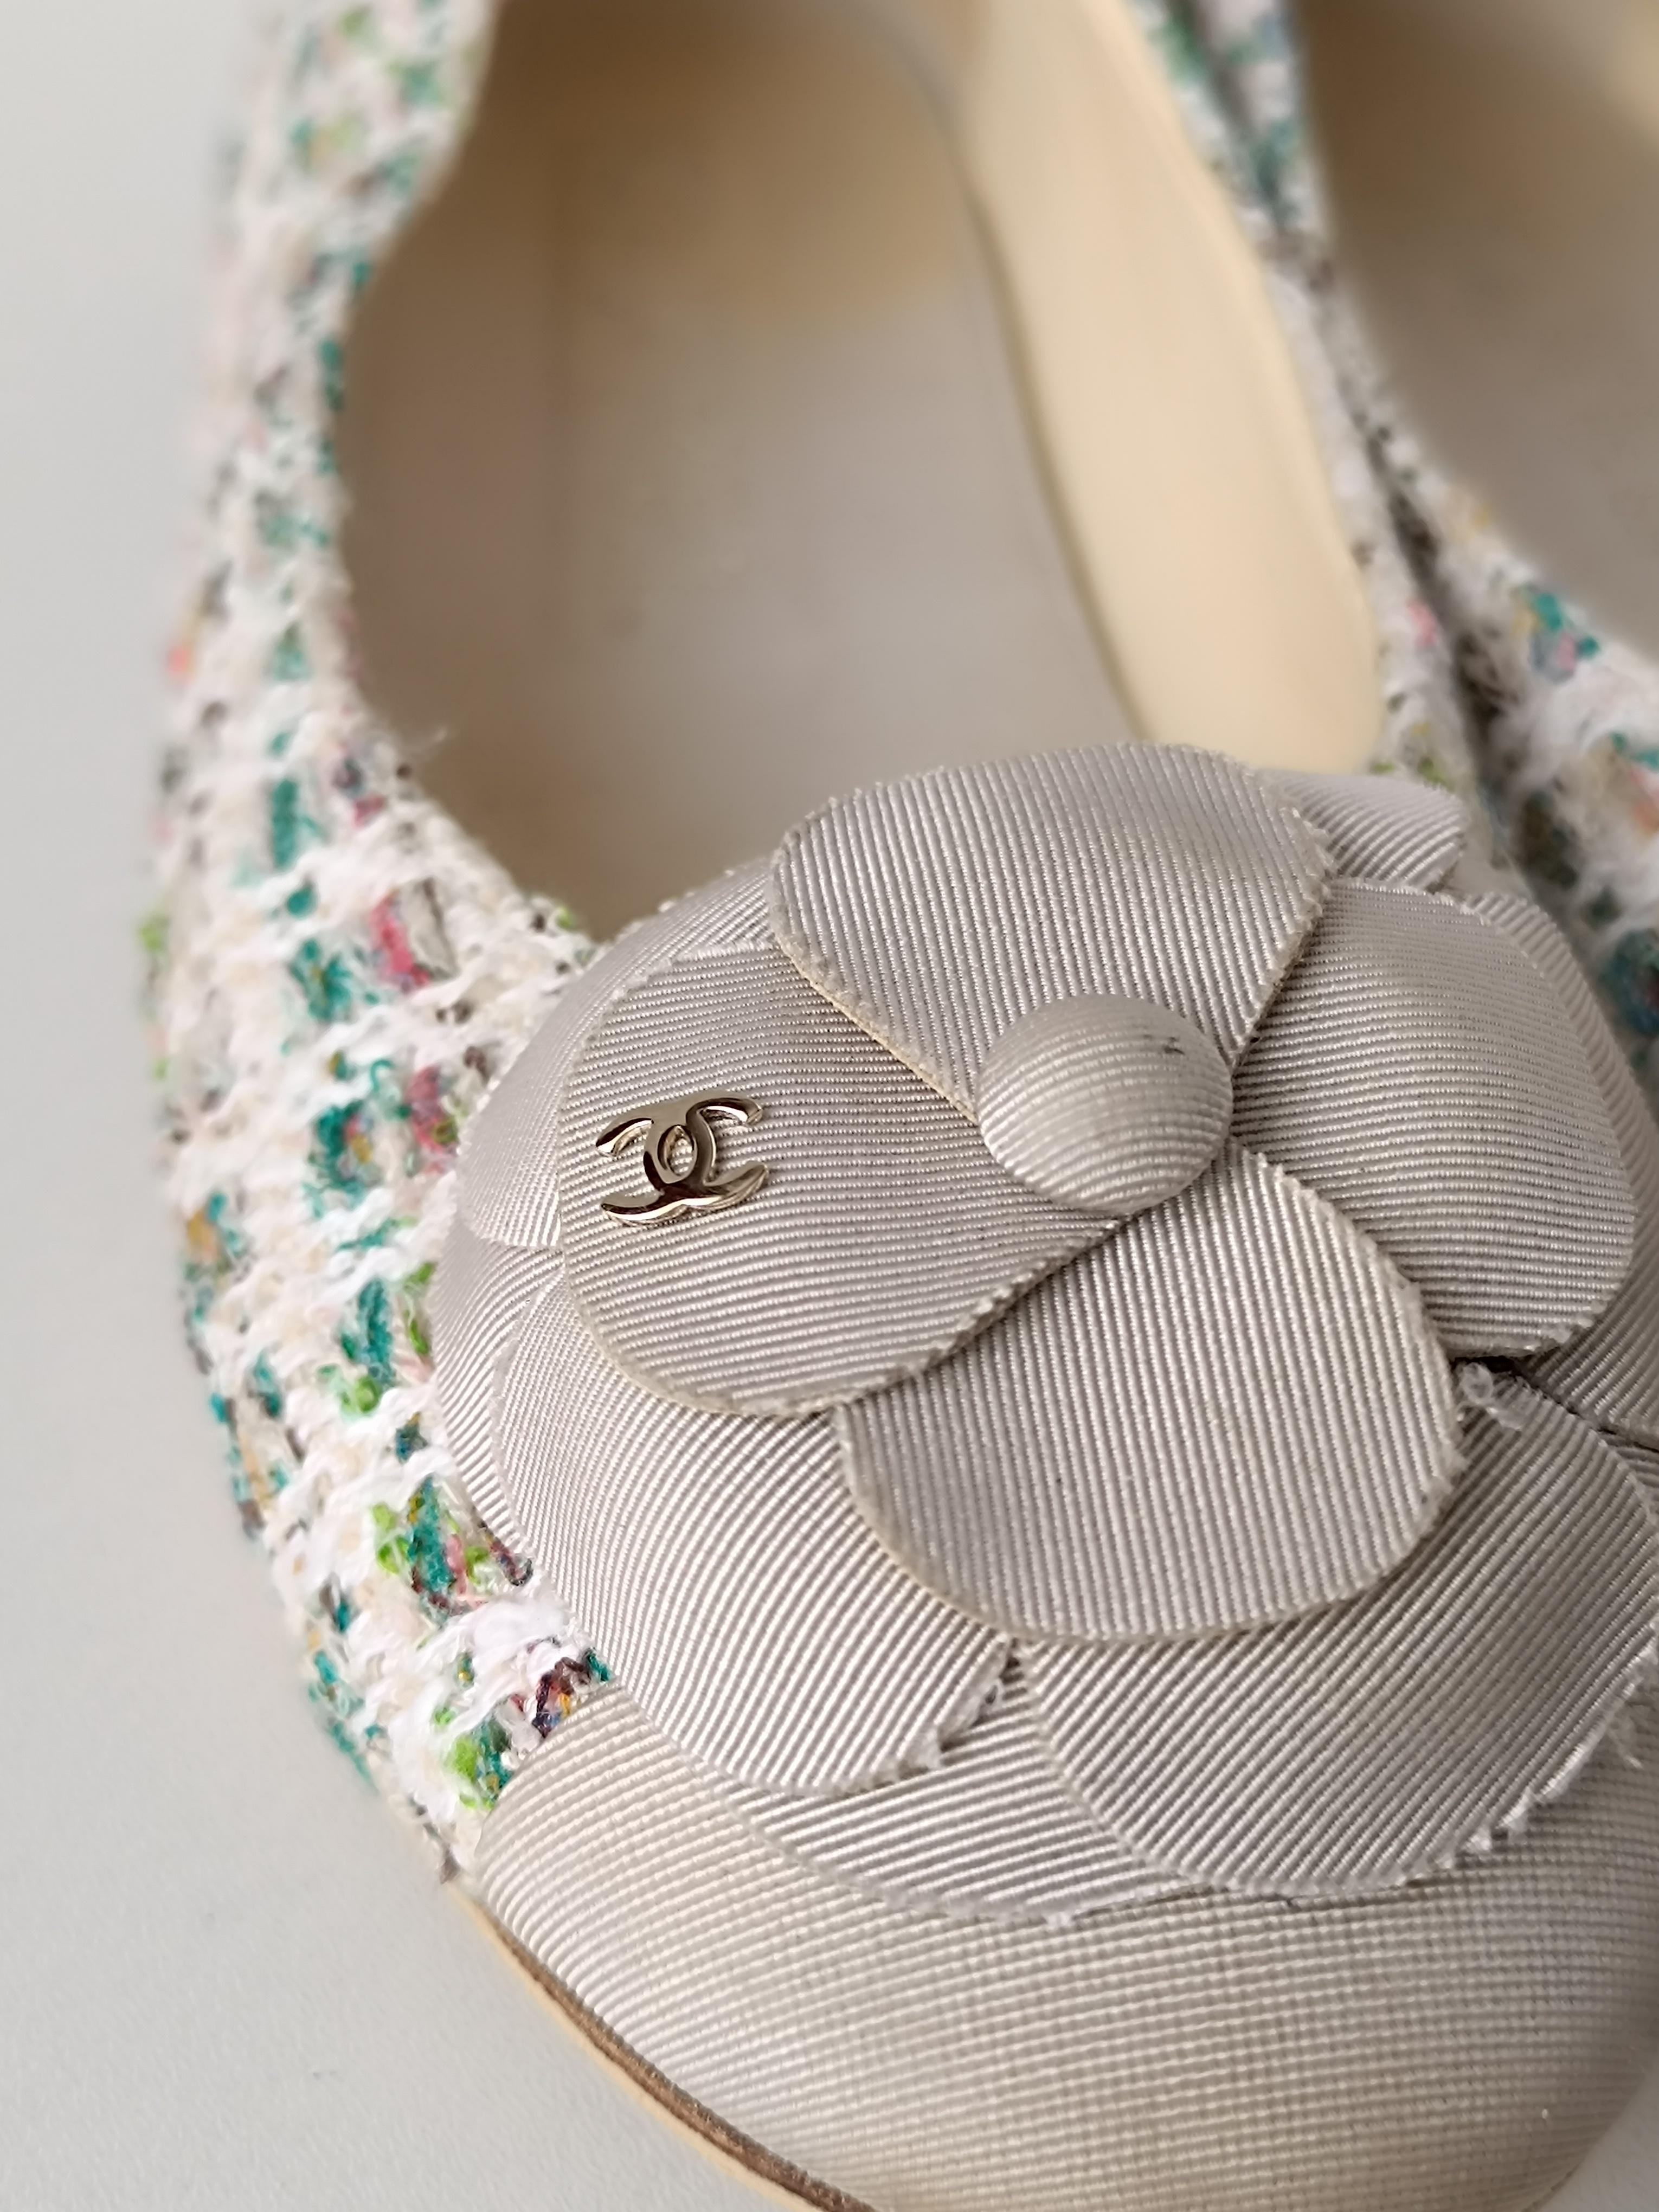 Chanel & Karl Lagerfeld Camellia TWEED Ballet Flats
Chanel by Karl Lagerfeld 
Collection: 17B
Country of production: Italy
Chanel style:E G32896
Dimensions: 36,5 IT 
Measurements:
Insole length is 22 cm / 8.66 inches

Yellow, turquoise, blue, light